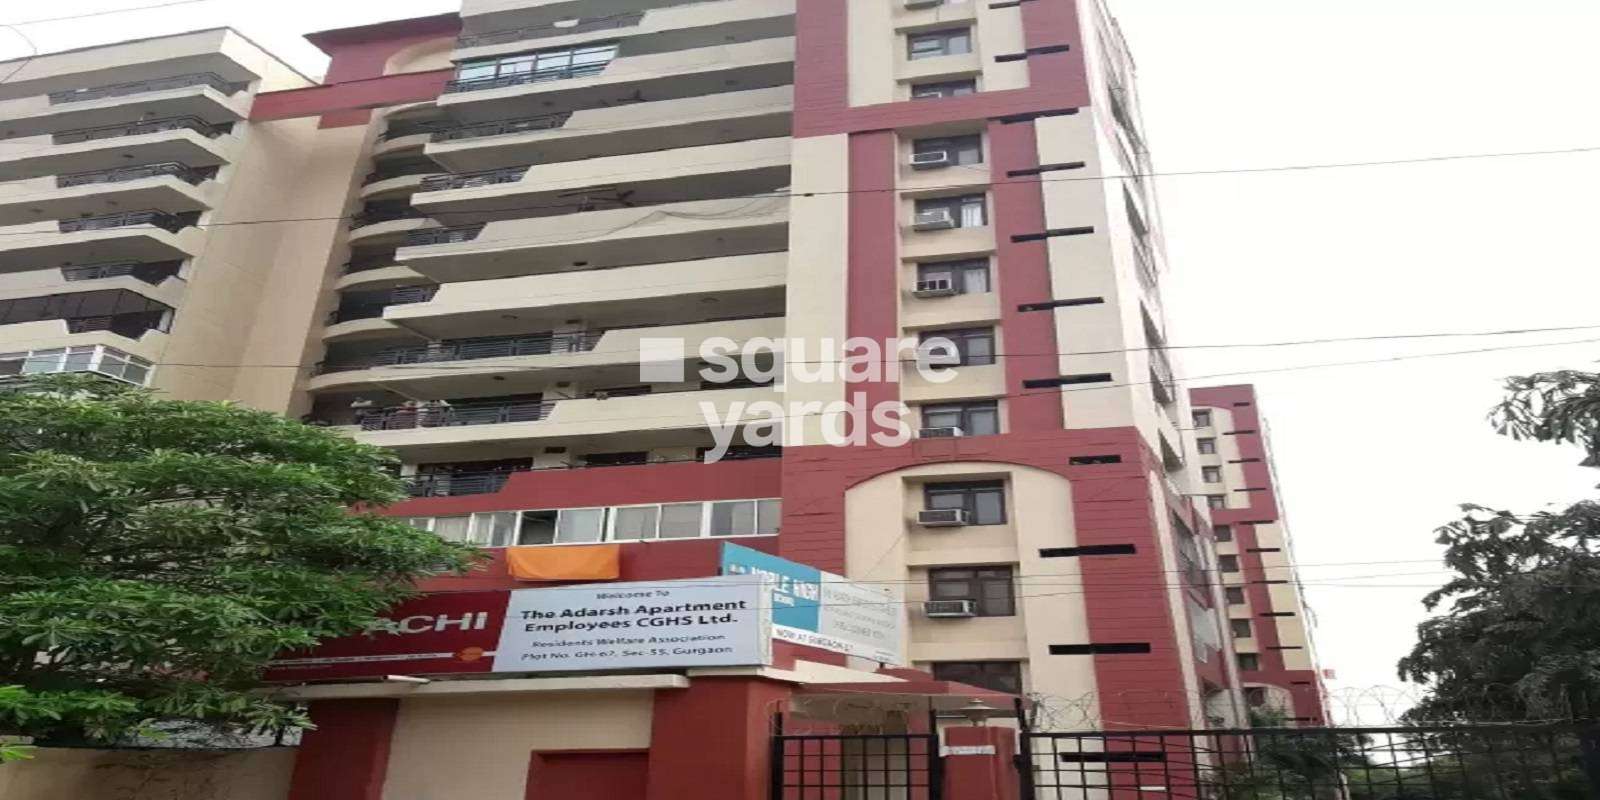 The Adarsh Apartments Cover Image